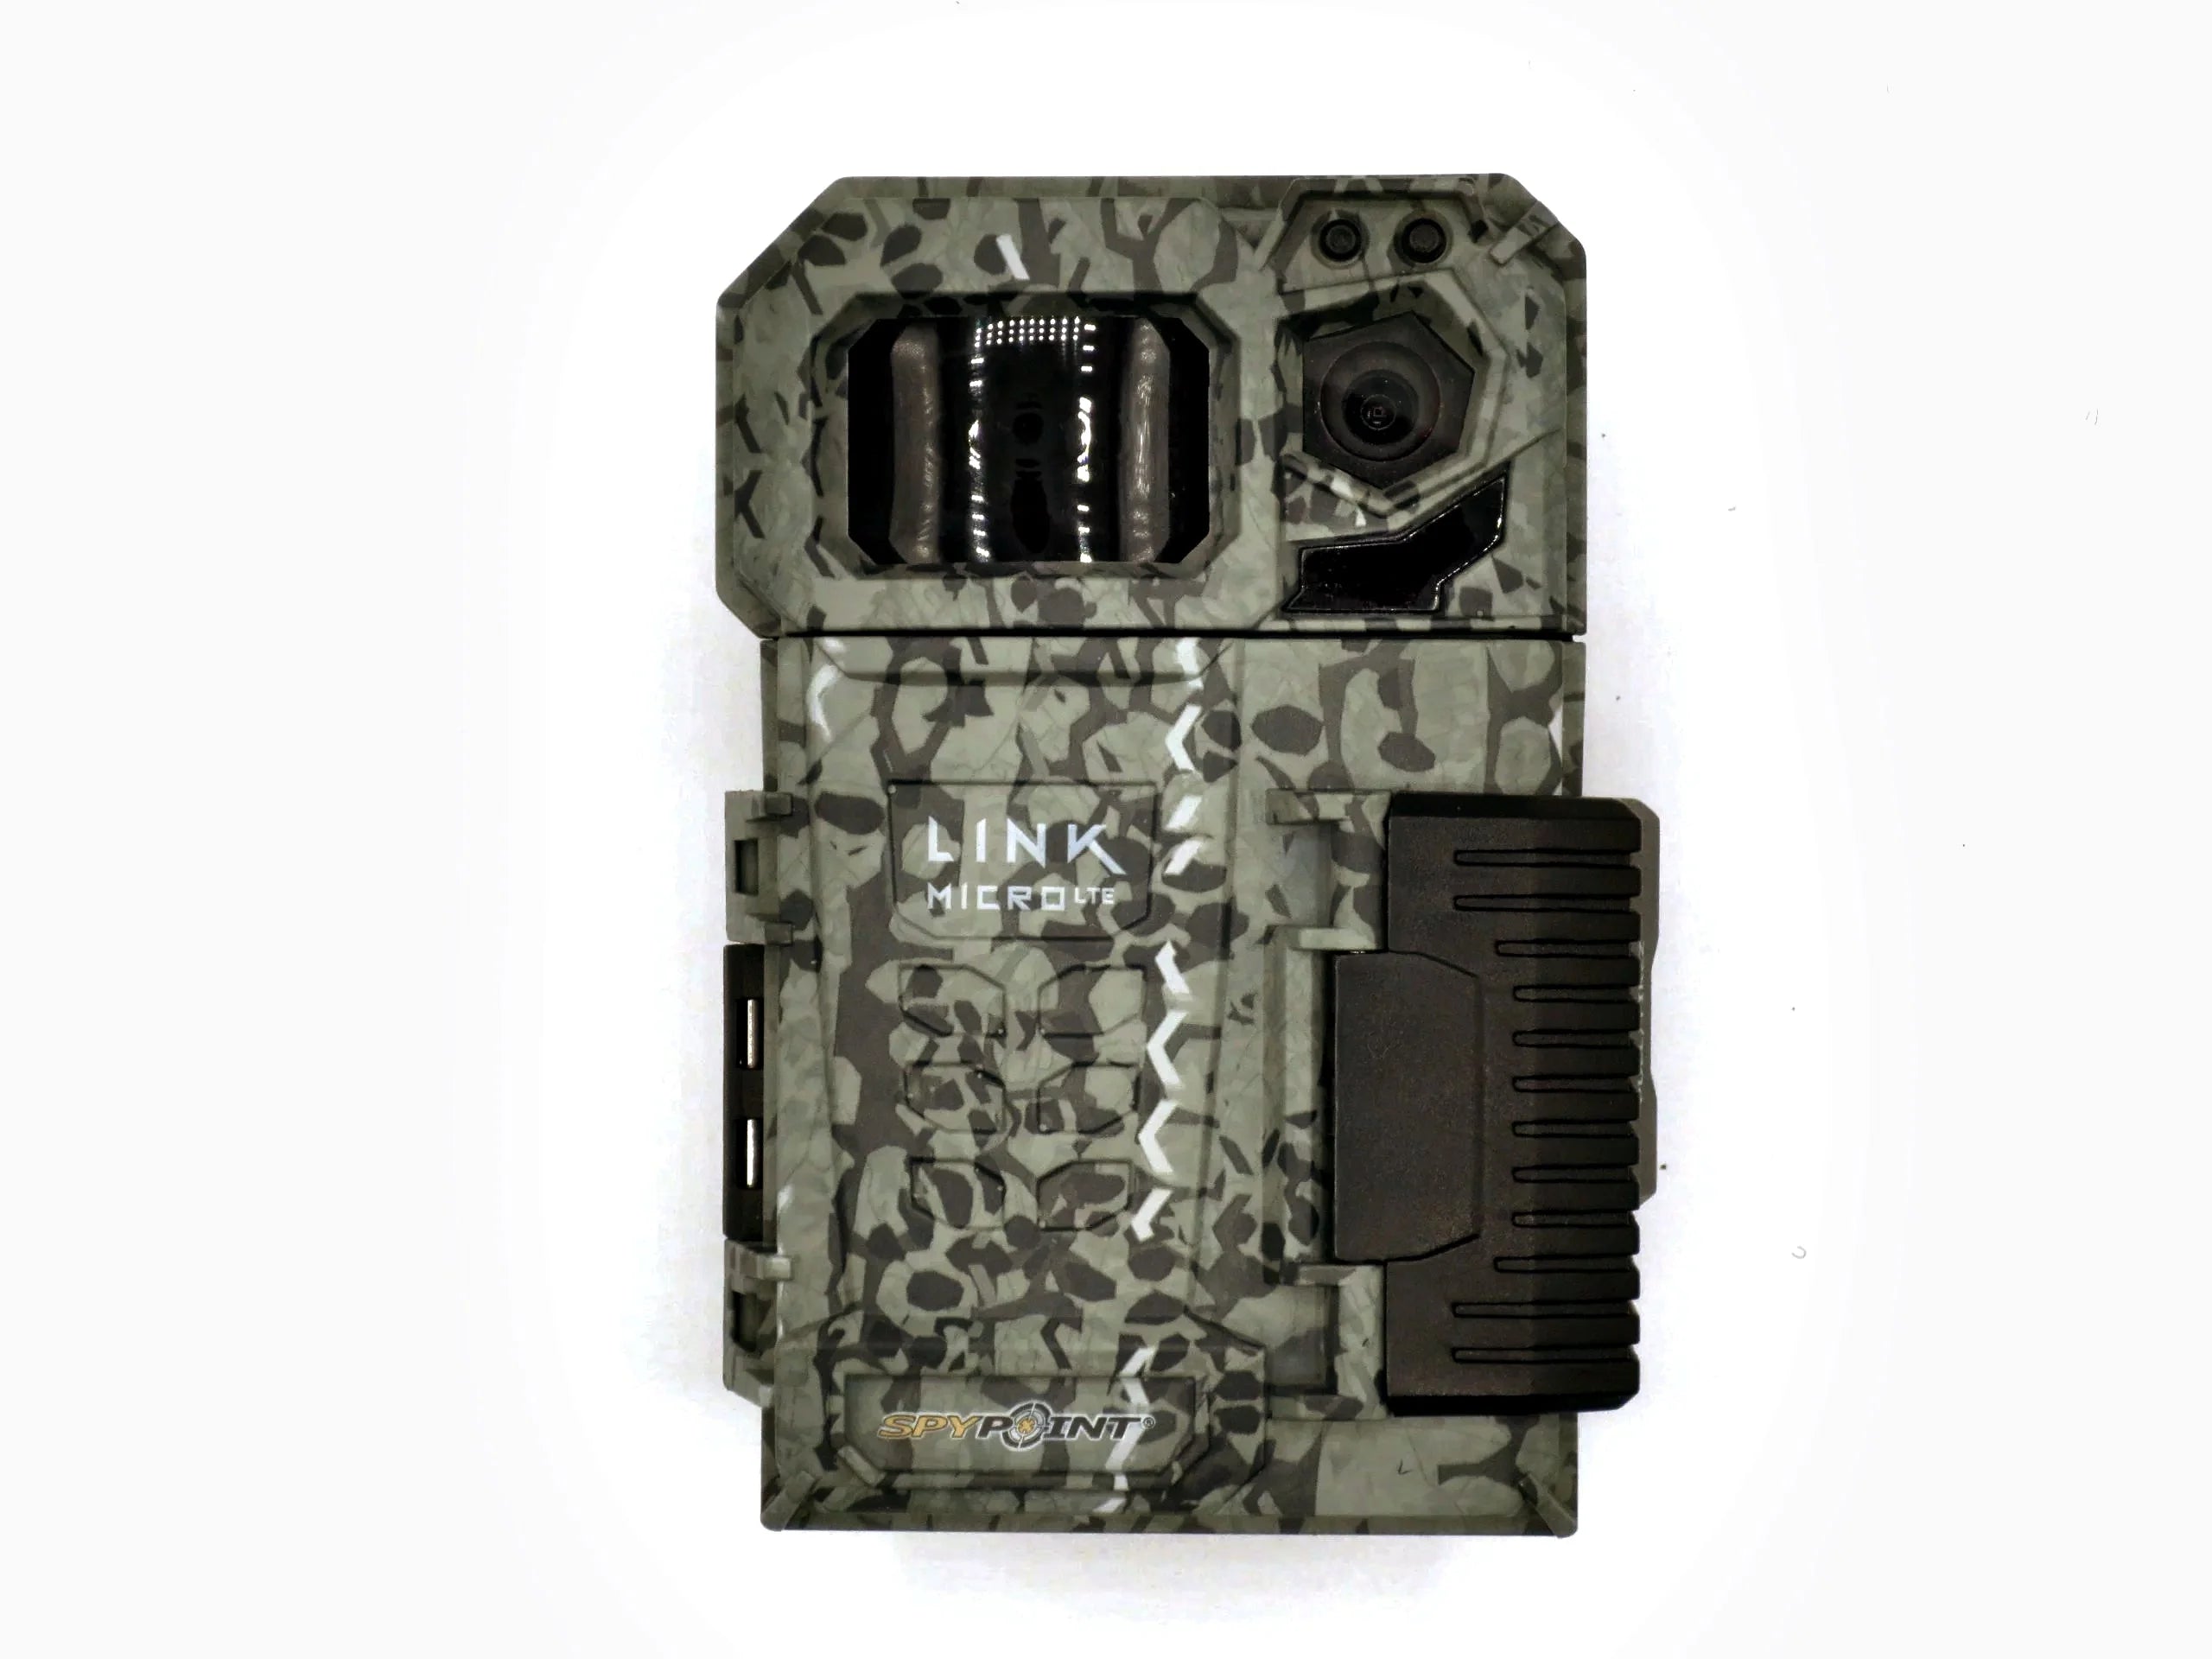 Product Image of CLEARANCE Spypoint LINK-MICRO-LTE cellular Trail wildlife camera